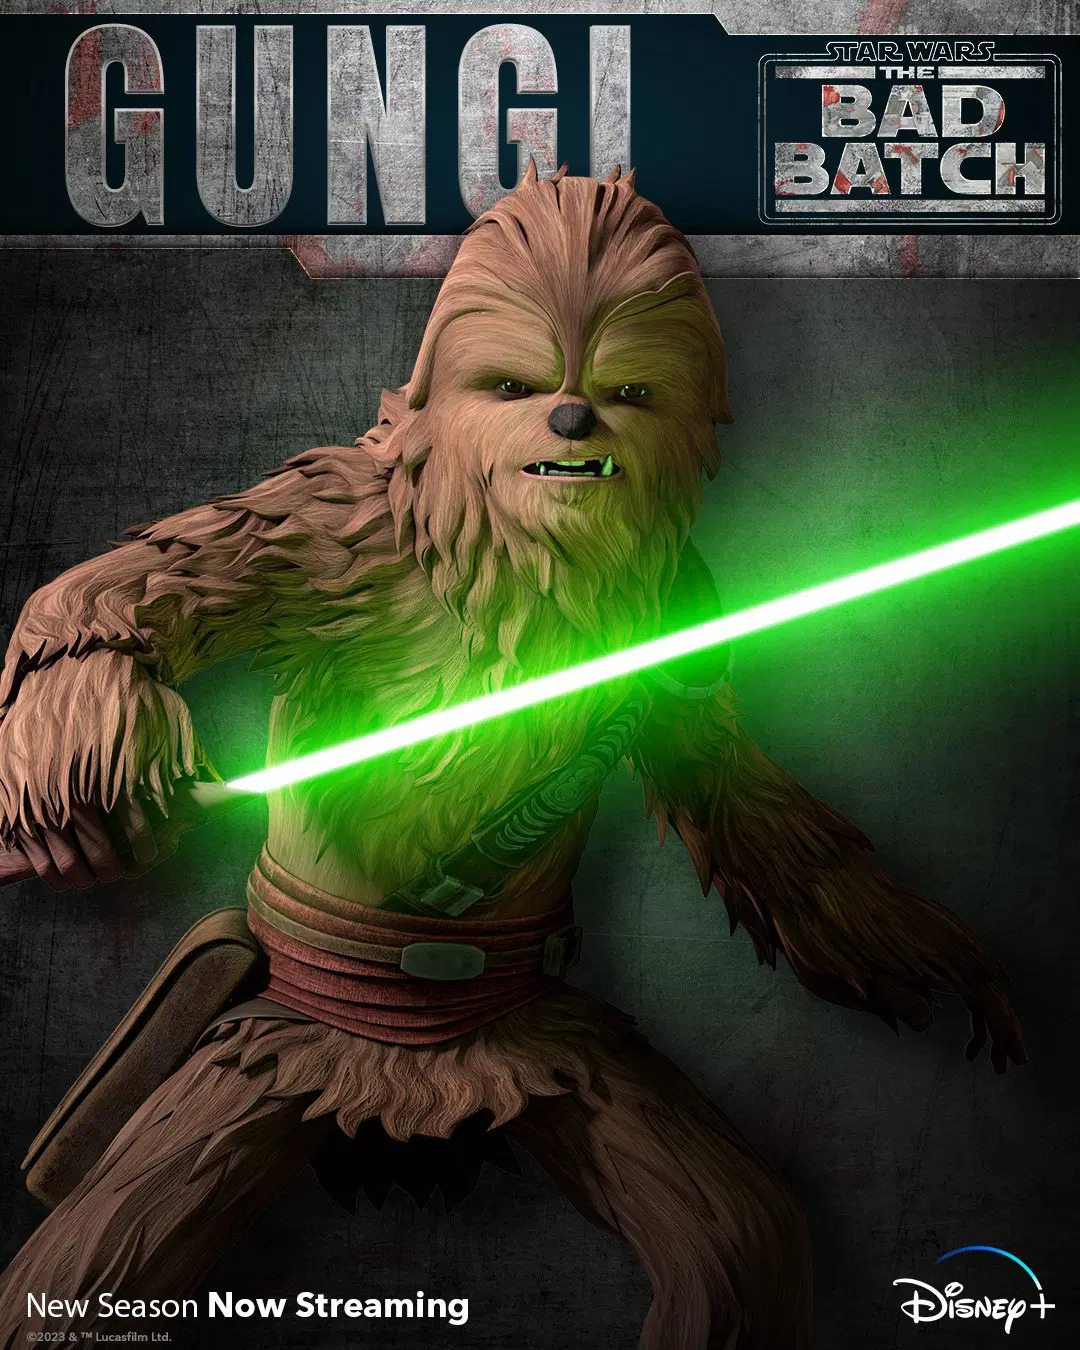 Extra Large TV Poster Image for Star Wars: The Bad Batch (#35 of 60)